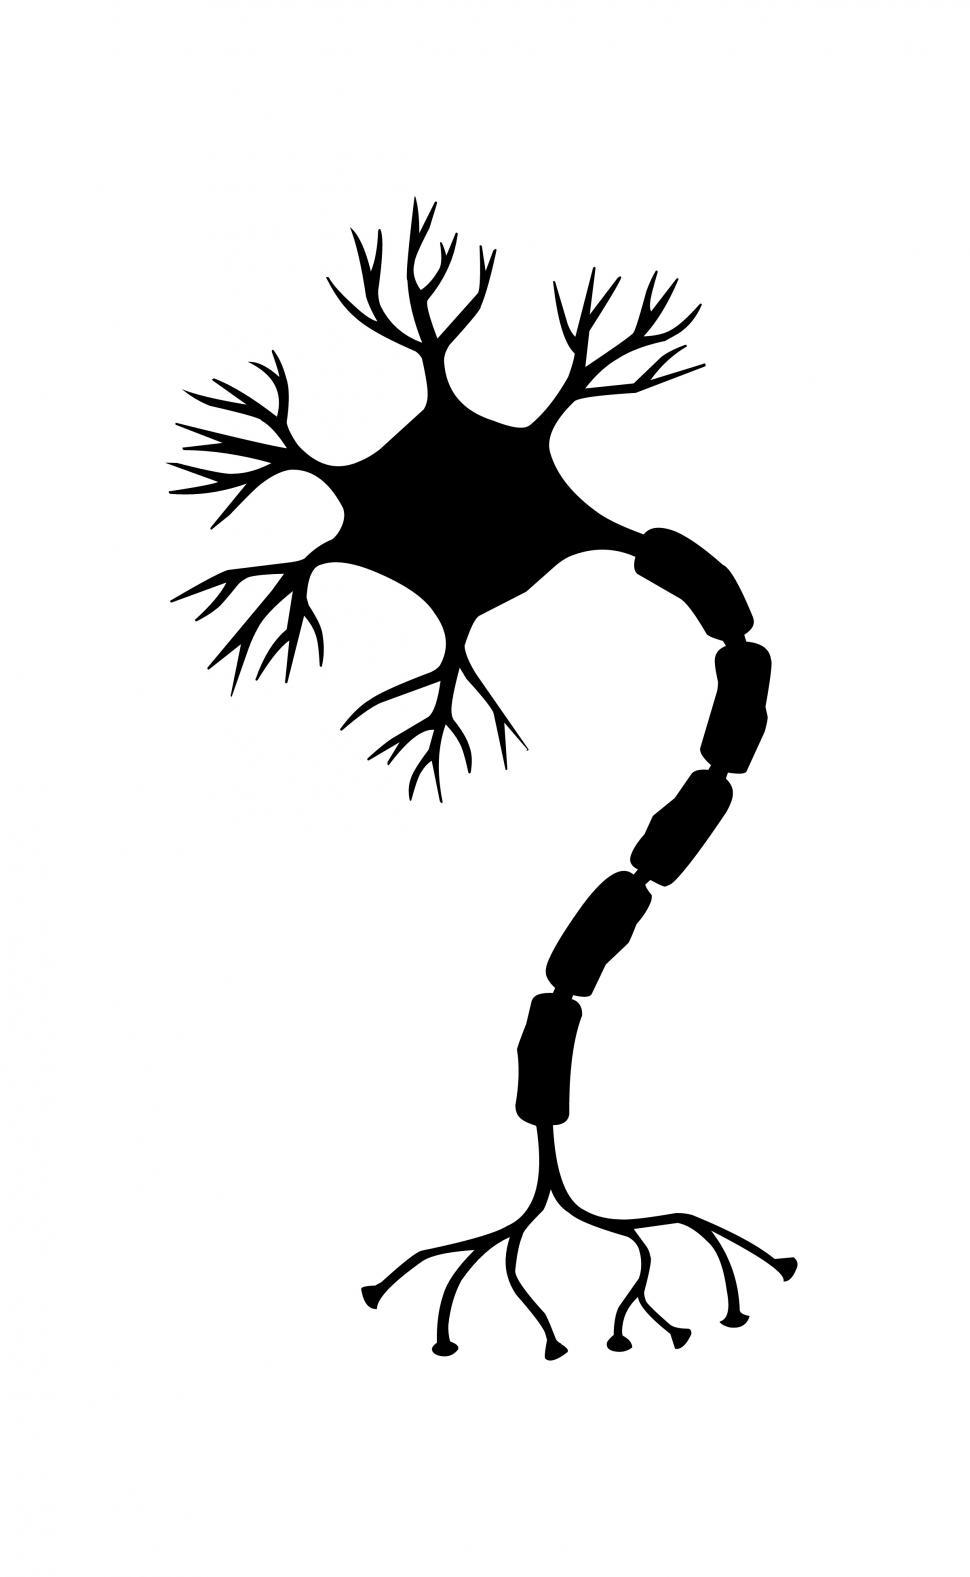 Download Free Stock Photo of nerve cell Silhouette  